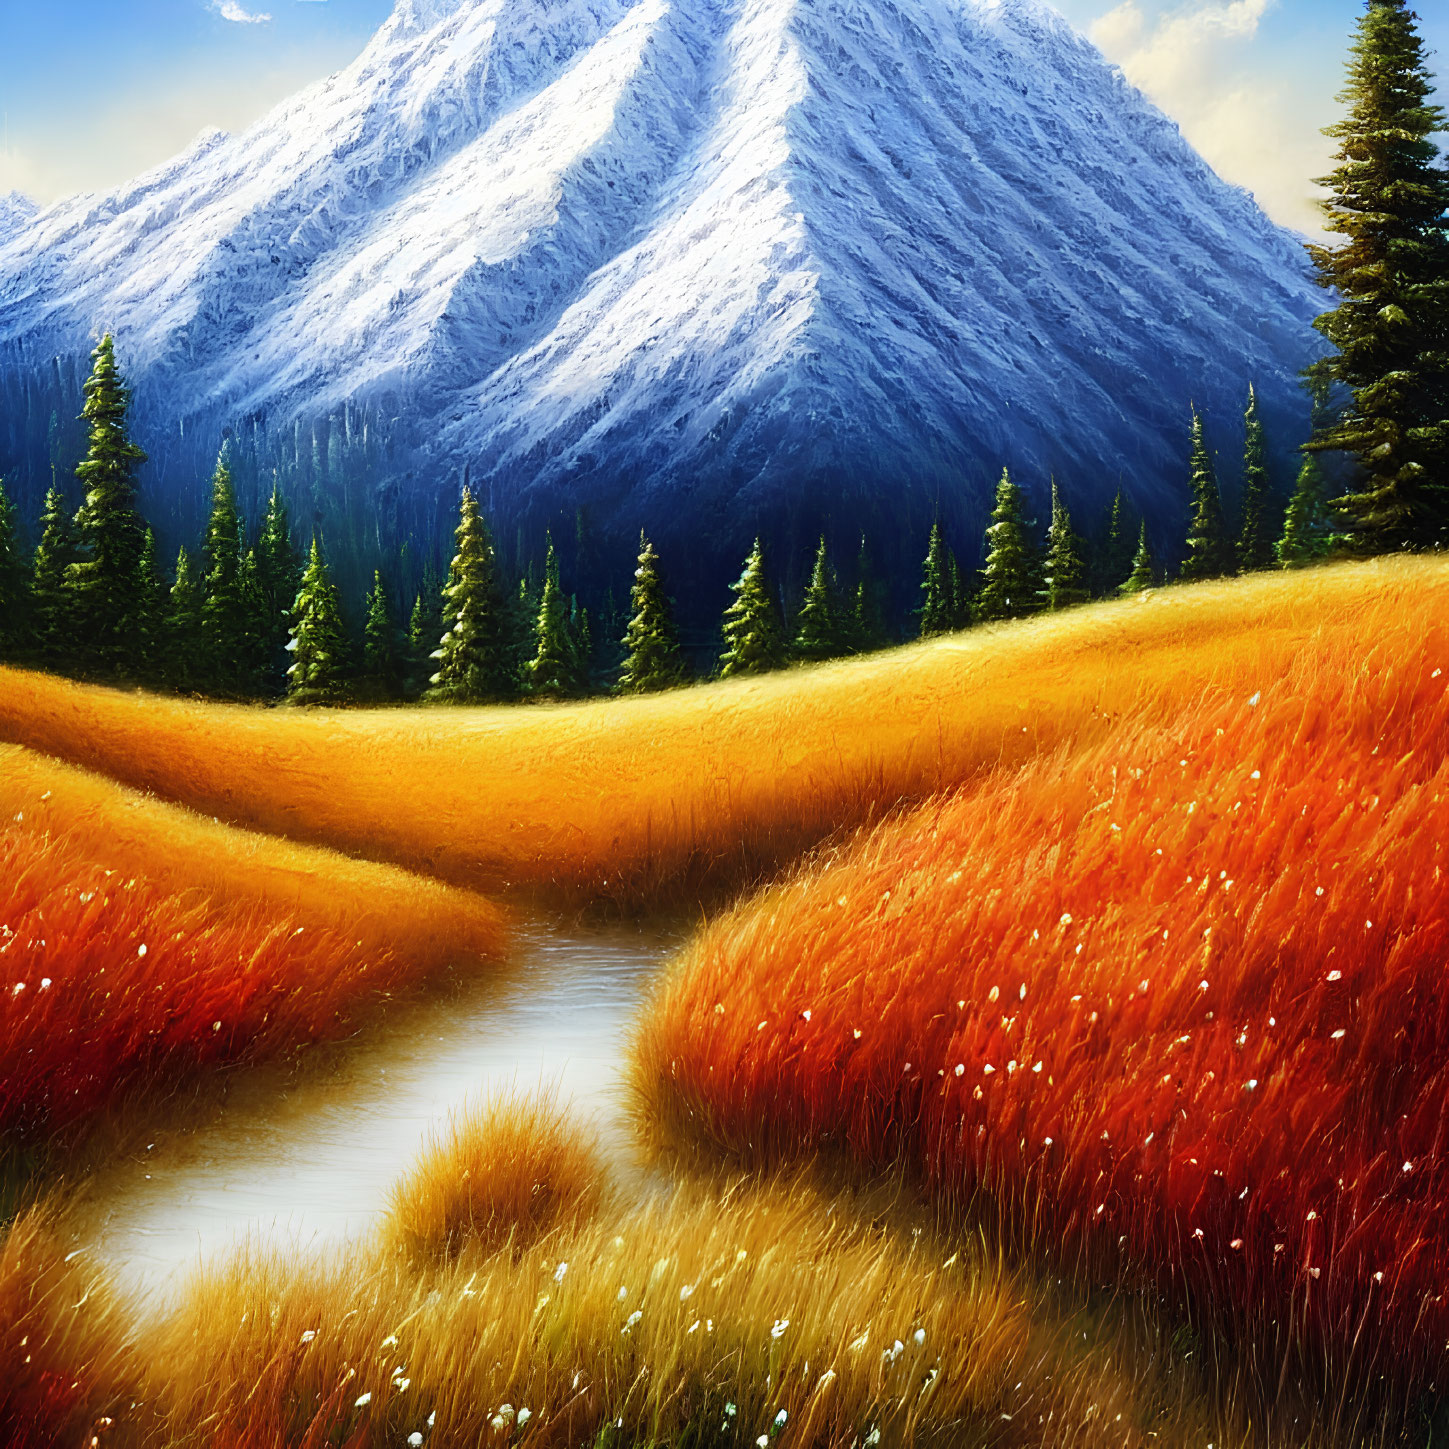 Scenic landscape painting: meandering stream, golden fields, evergreen trees, snow-capped mountain